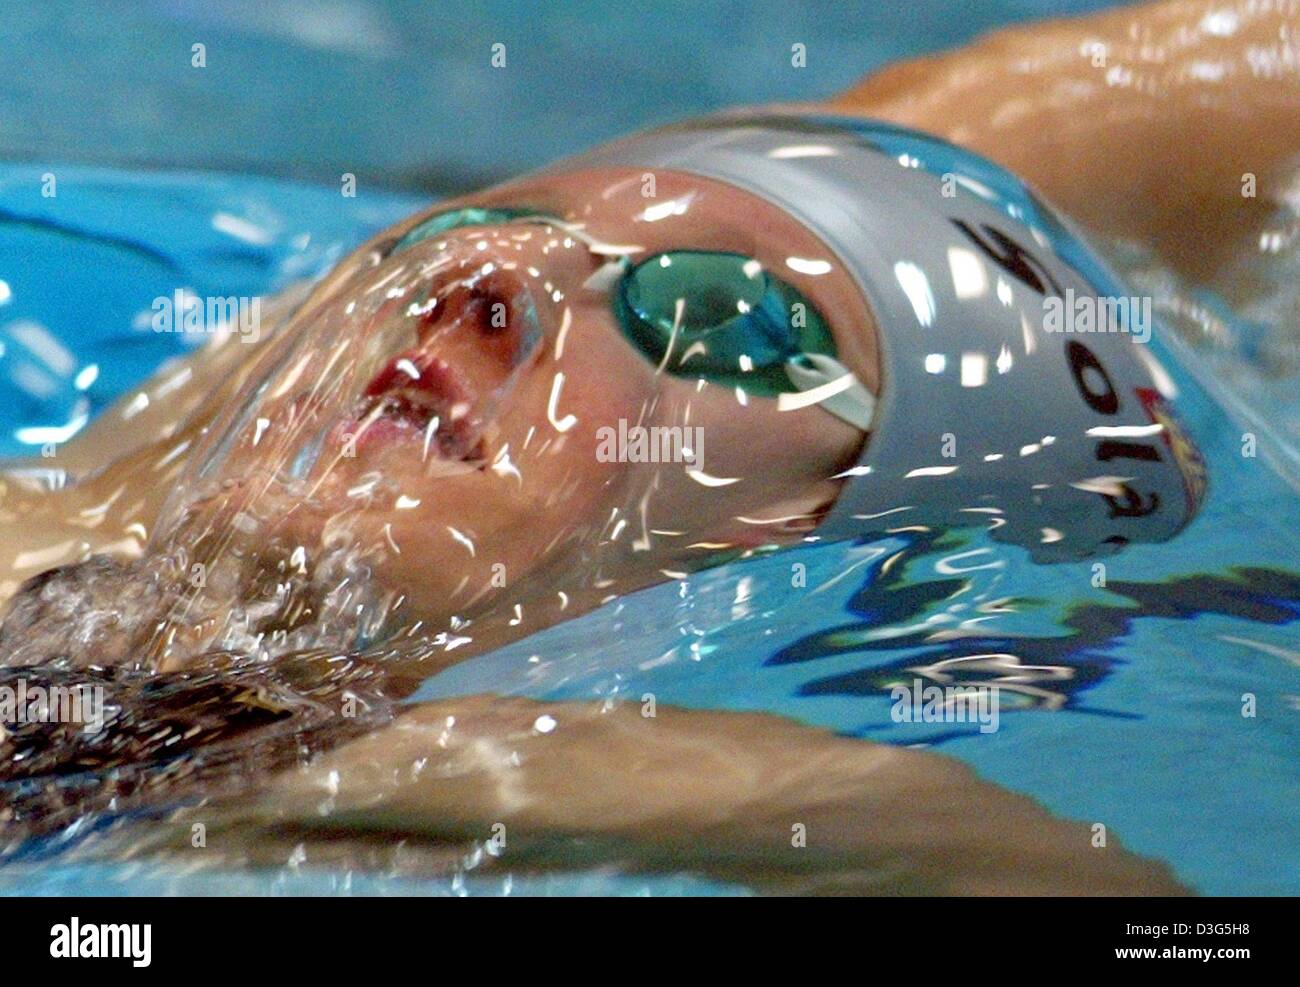 (dpa) - German swimmer Antje Buschschulte is in action during the 100 m backstroke at the German short course championships in Gelsenkirchen, Germany, 30 November 2003. She wins the event in 59.16 seconds. Stock Photo